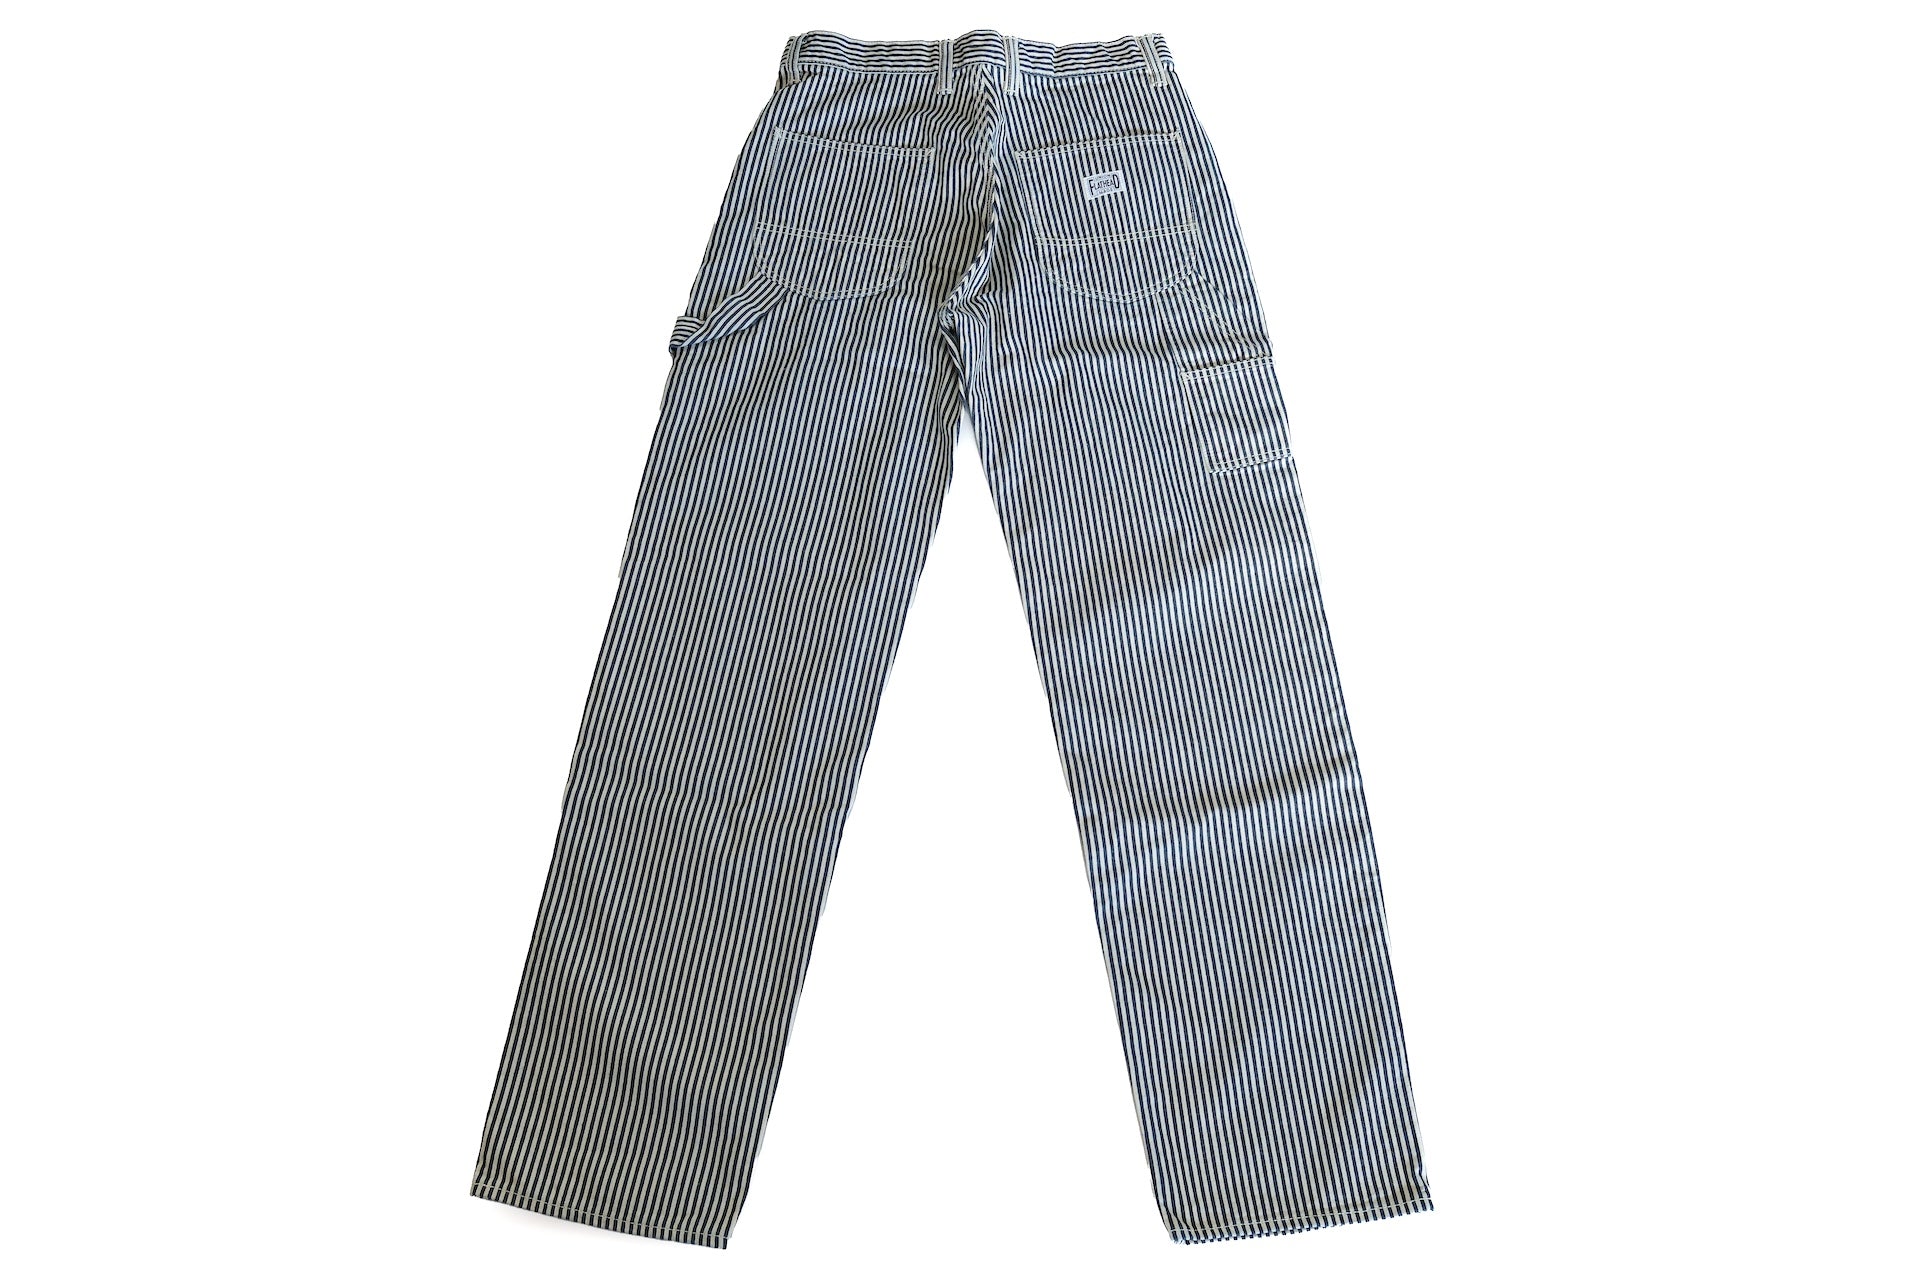 The Flat Head 11oz Indigo Dyed Hickory Painter Pants (Straight Tapered fit)